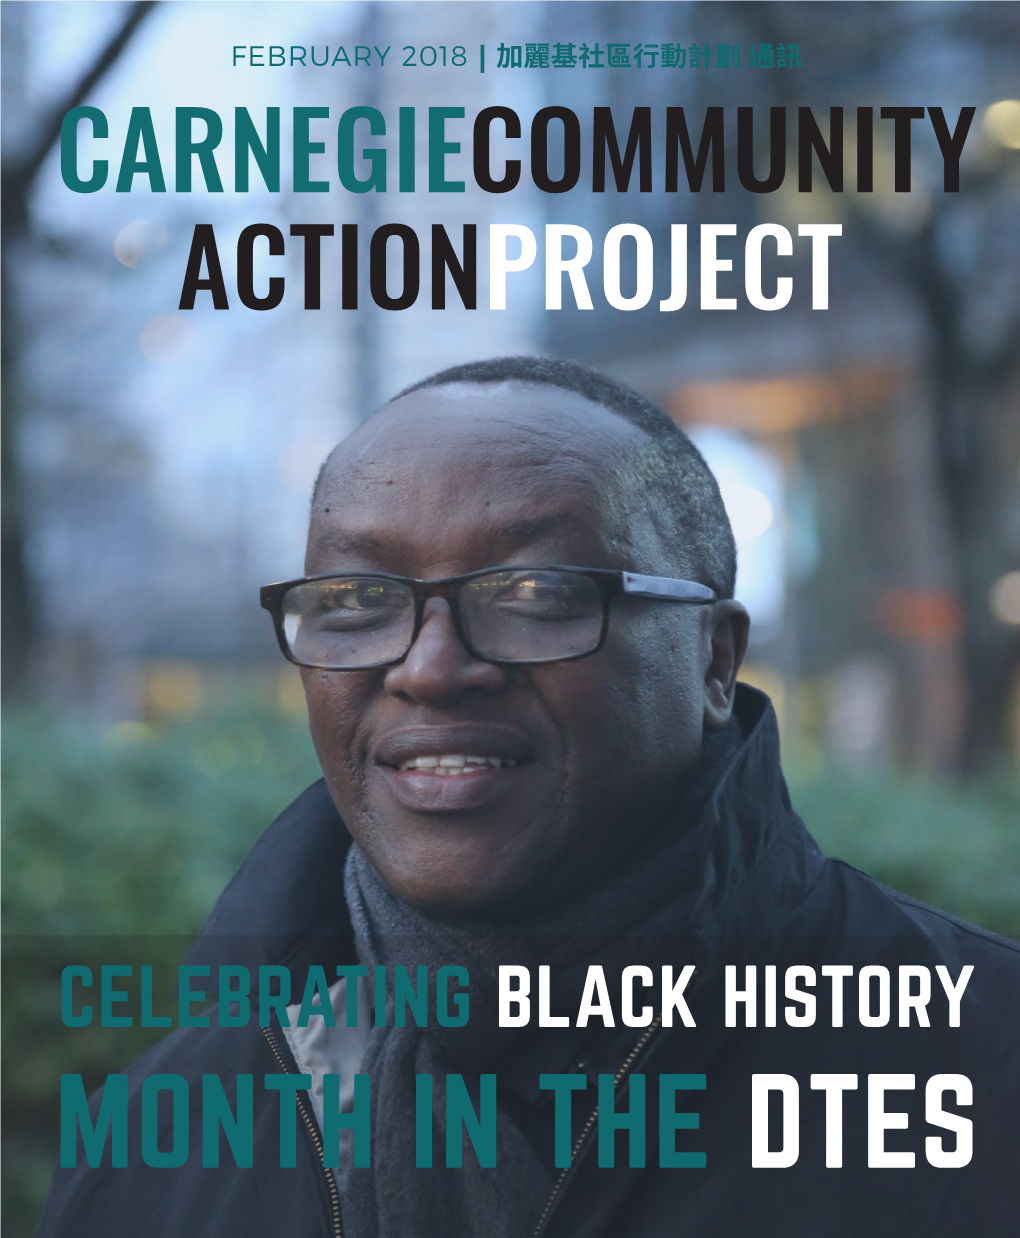 Month in the Dtes an Interview with Lama Mugabo on Black History Month, Racism & Housing, and Hogan’S Alley